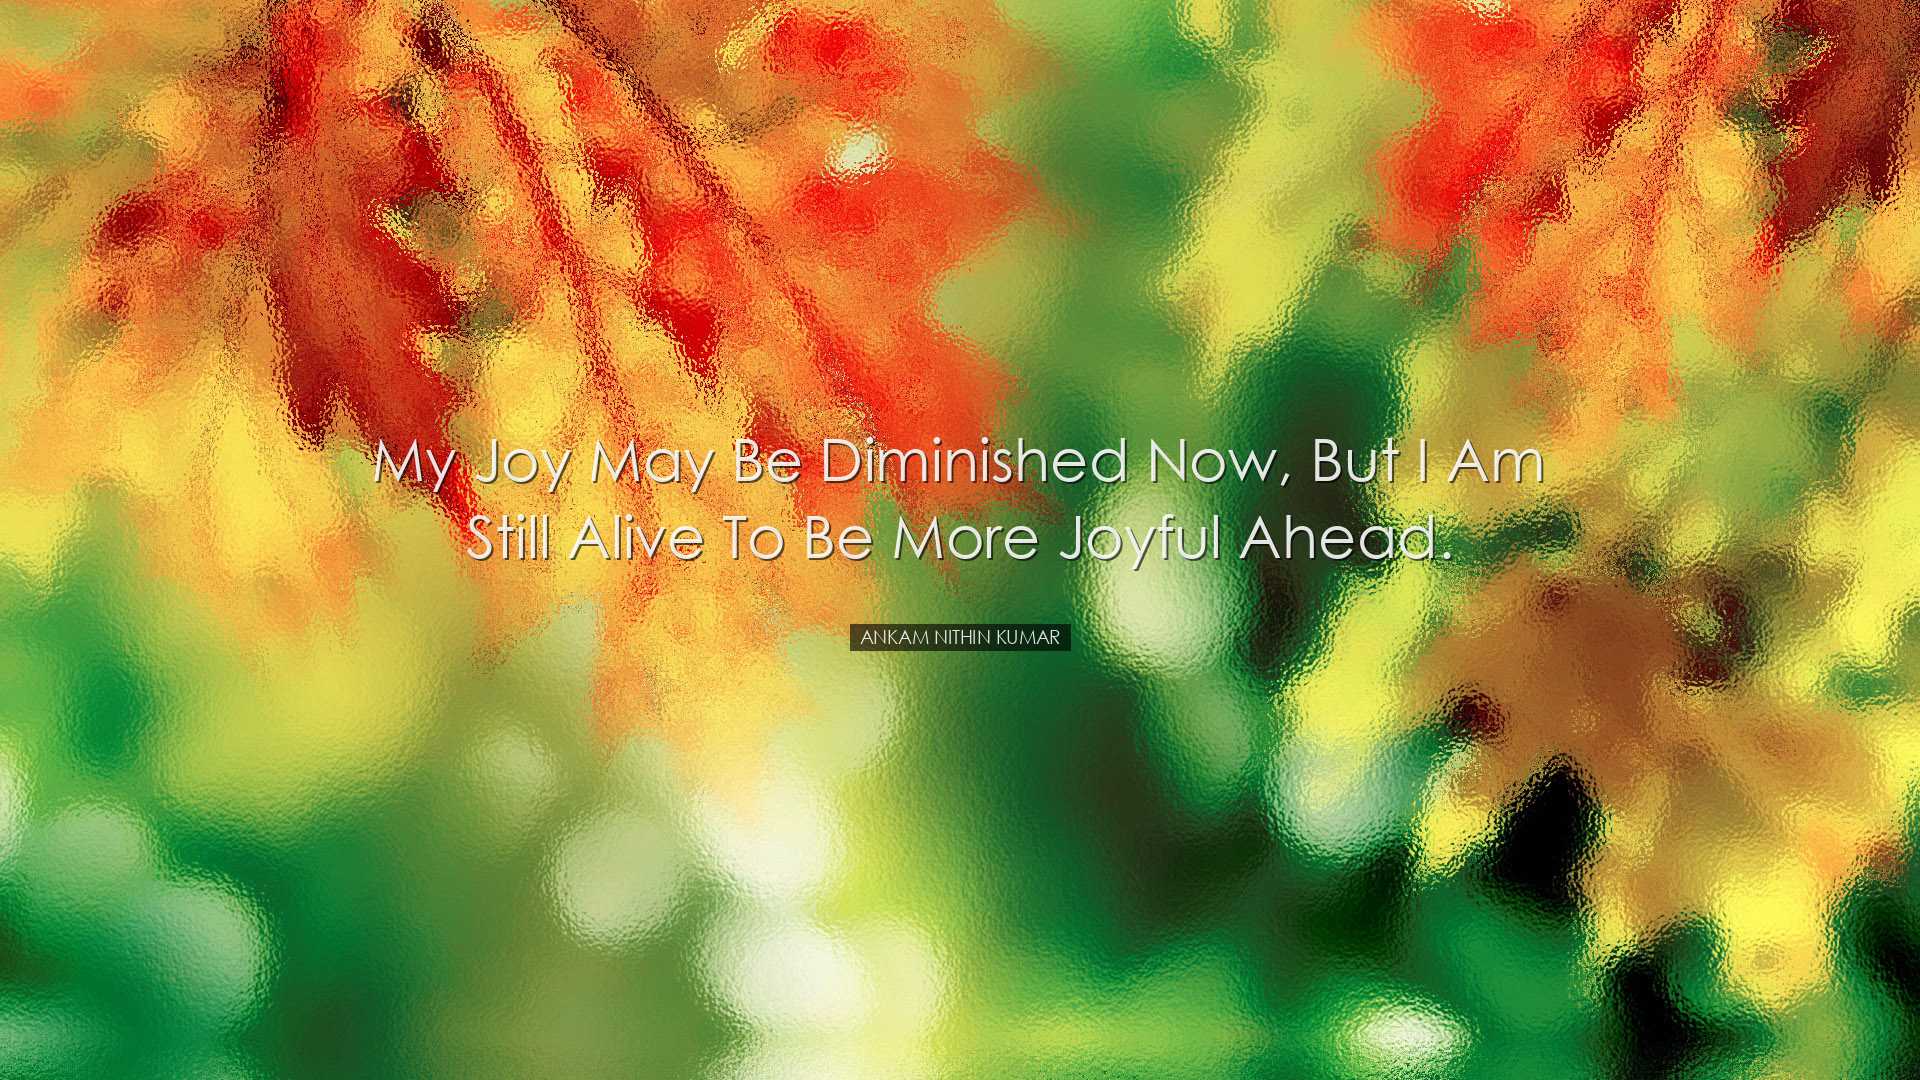 My joy may be diminished now, but I am still alive to be more joyf